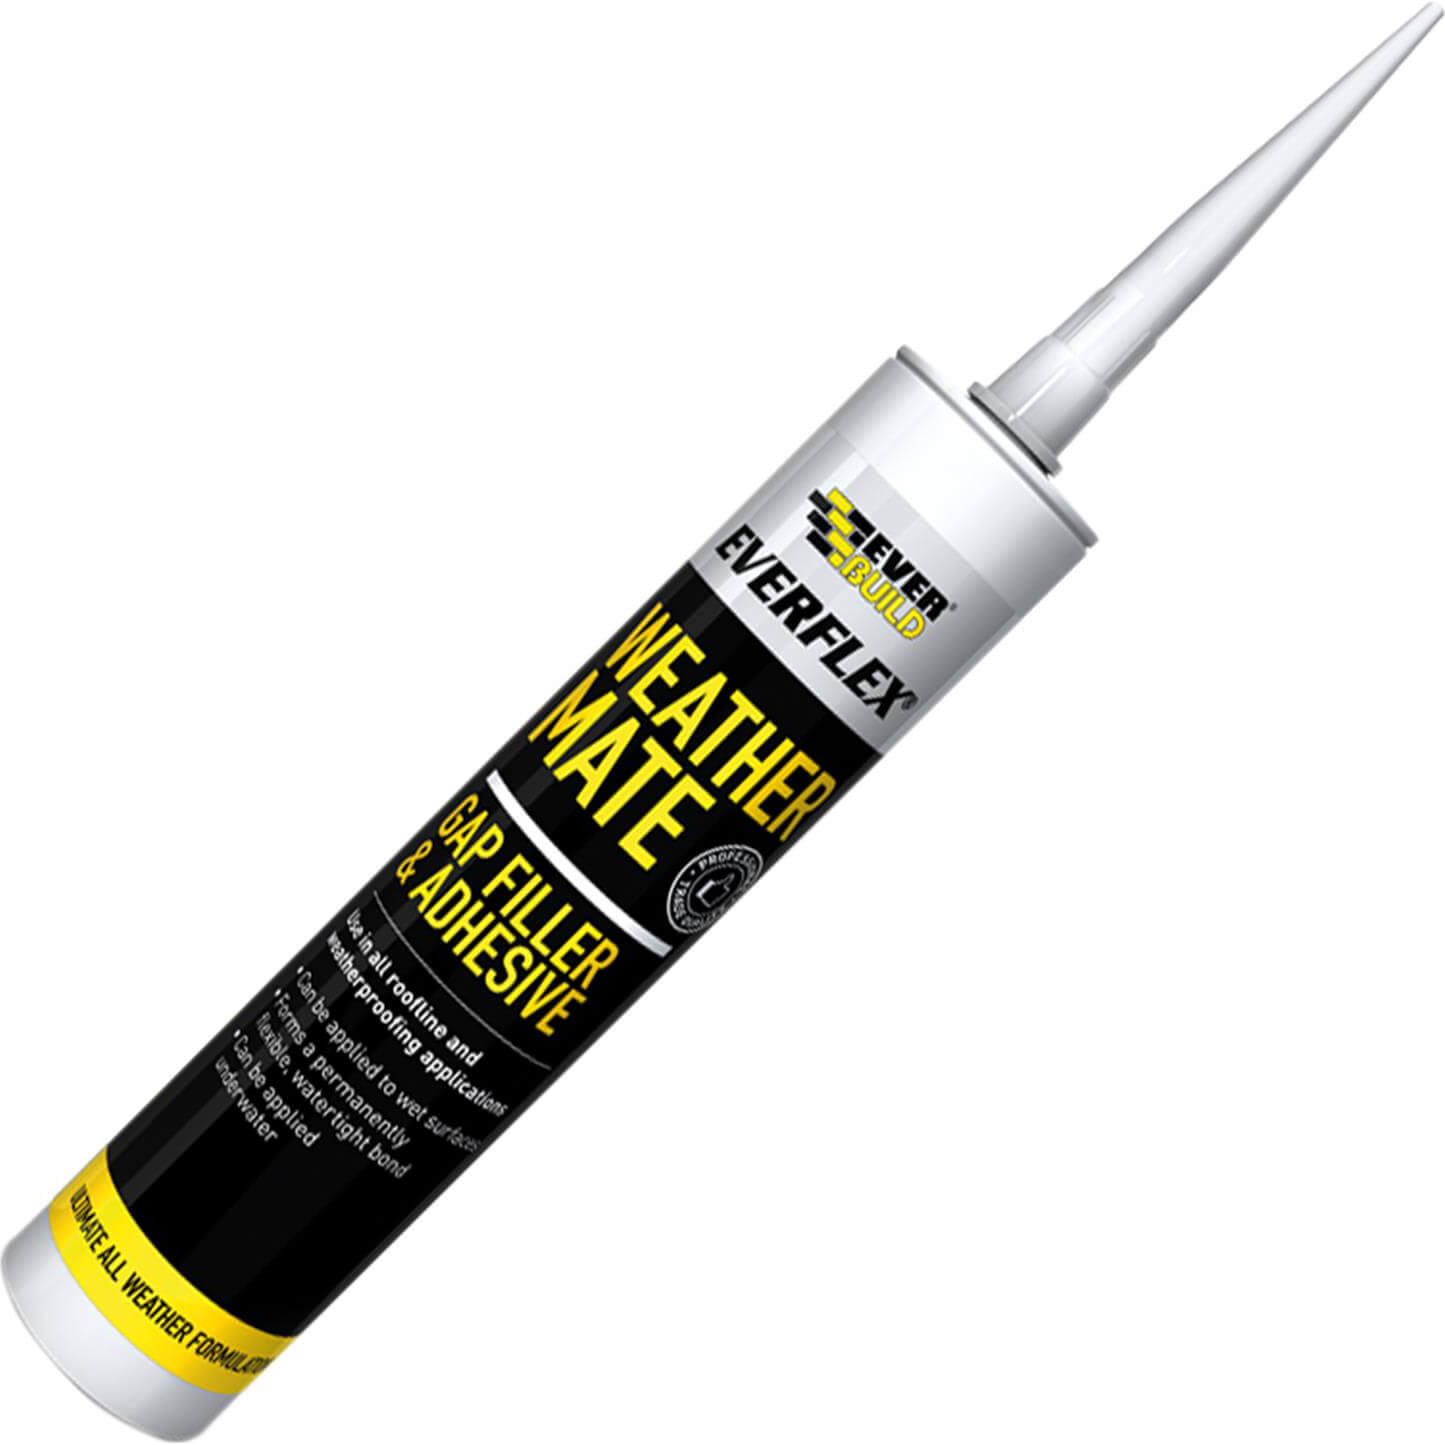 Image of Everbuild Weather Mate Sealant White 310ml